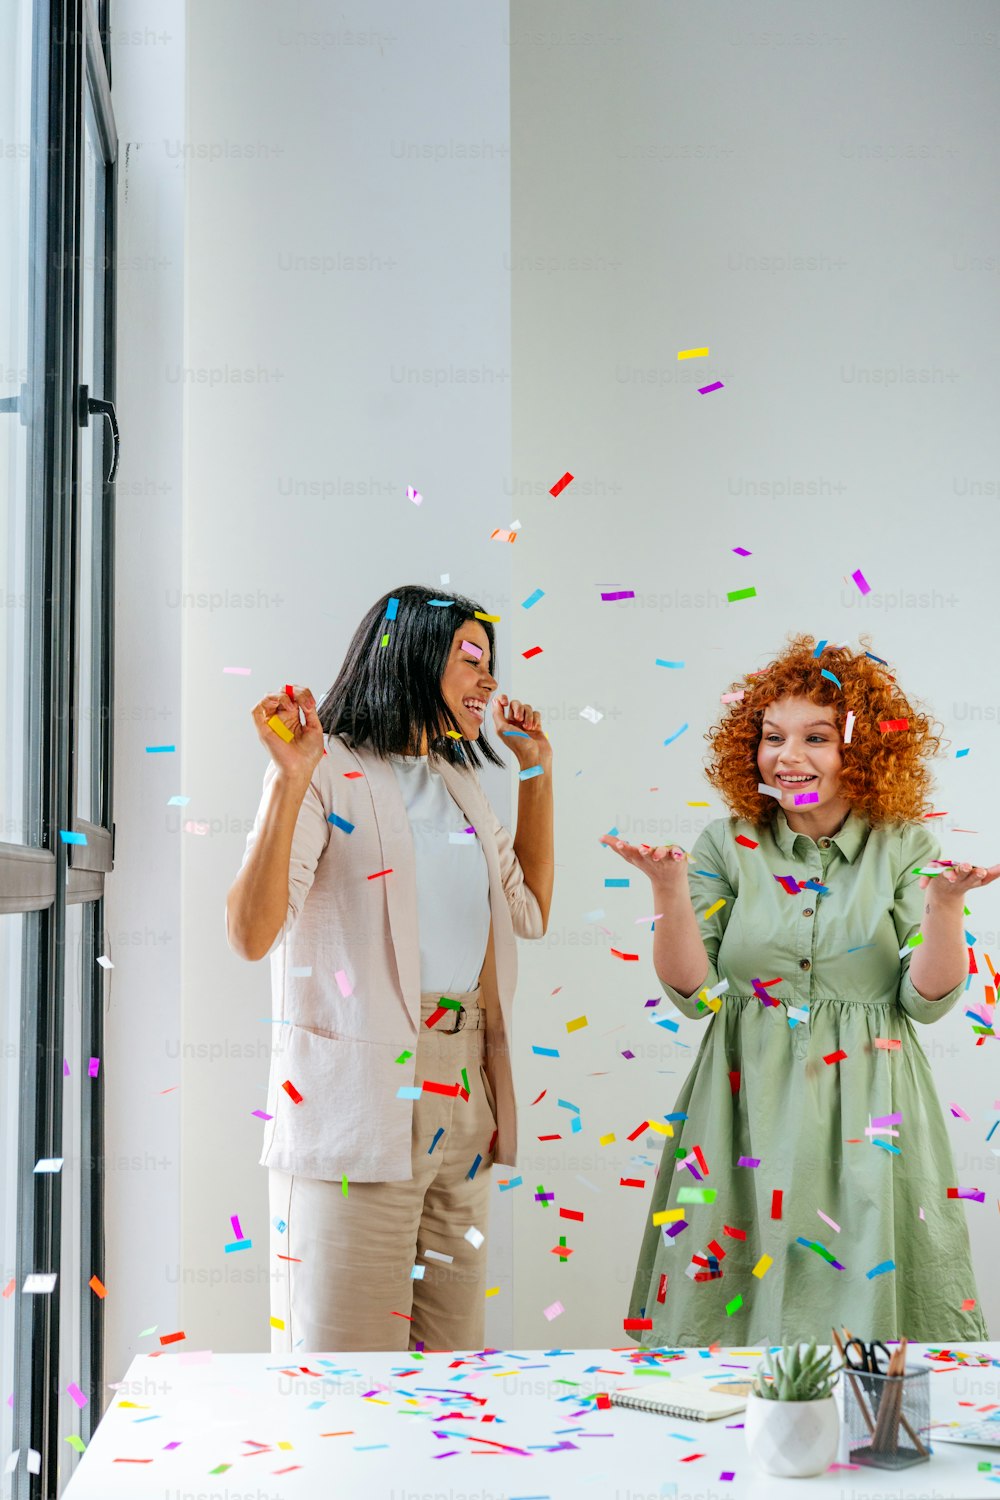 Two young business women having fun time catching confetti in the office. Party time on the work place. Emotions of joy, happiness and delight. Business women celebrating holiday or event in the office. Selective focus.